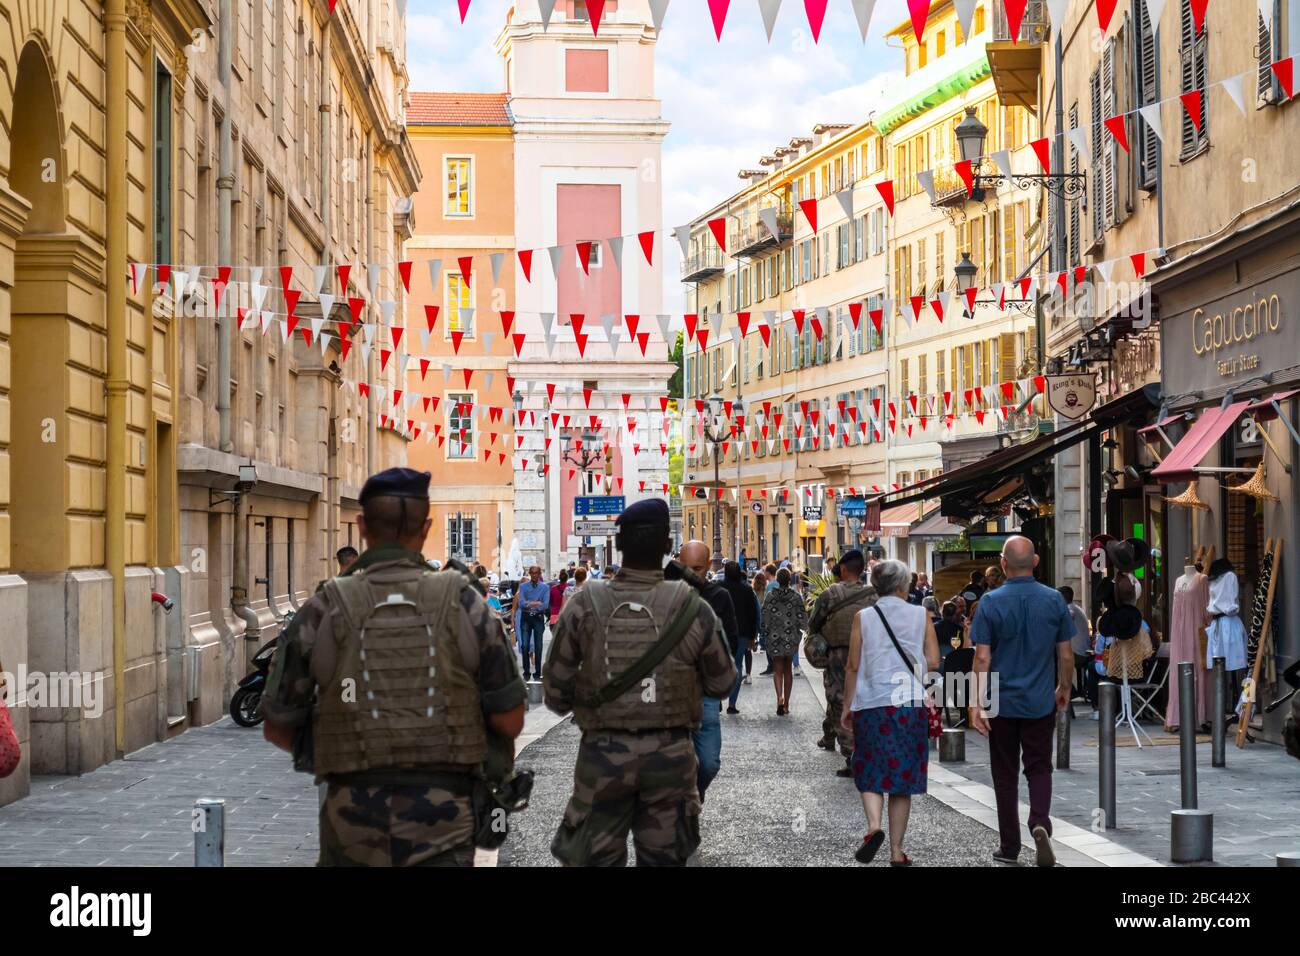 Military security armed police walk through Old Vieux Nice, France, towards Rusca Palace as flags drape across the alley late in the day. Stock Photo